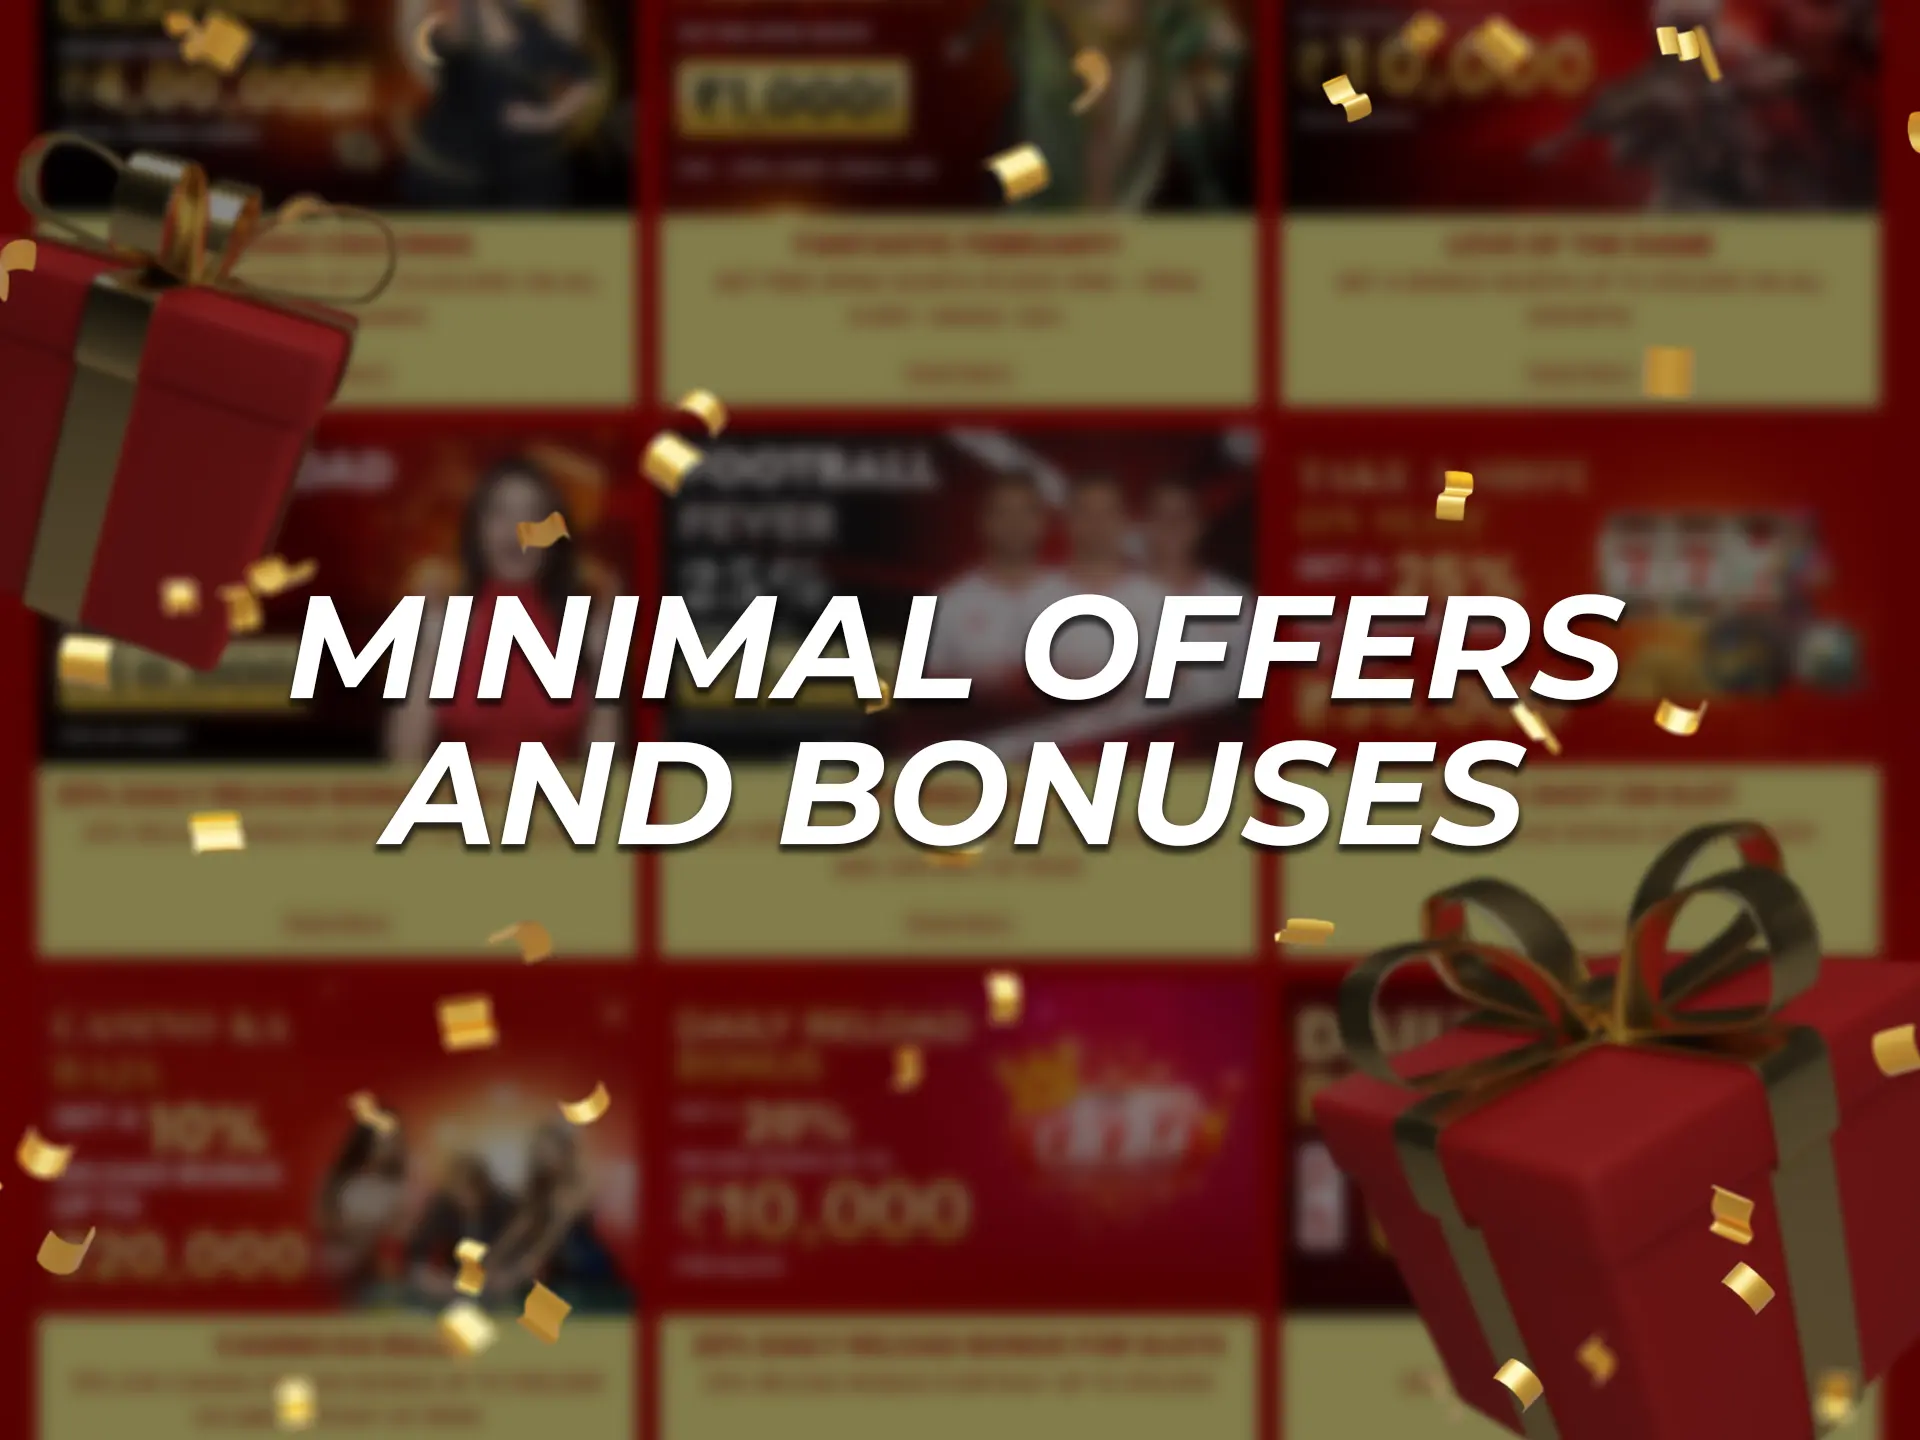 New online bookmakers often offer additional privileges and great promotions and bonuses.